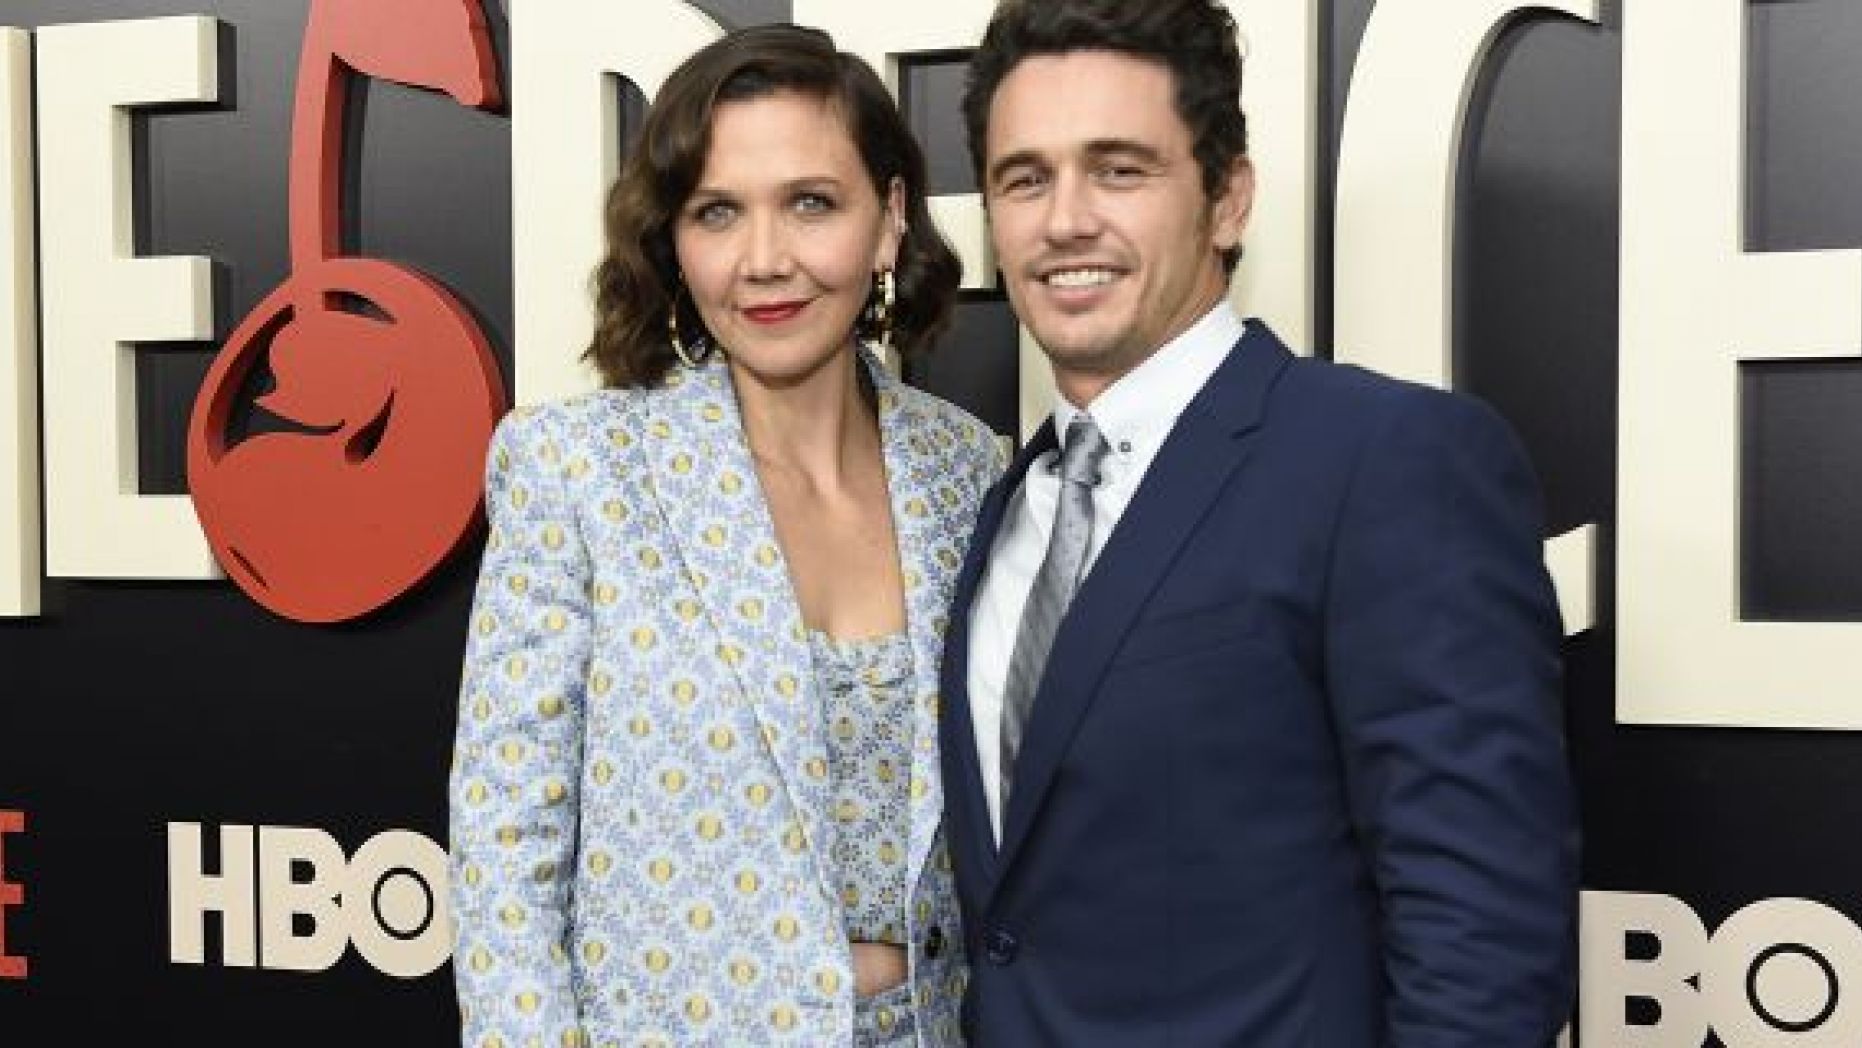 Maggie Gyllenhaal addressed the sexual misconduct allegations against "The Deuce" co-star James Franco. 